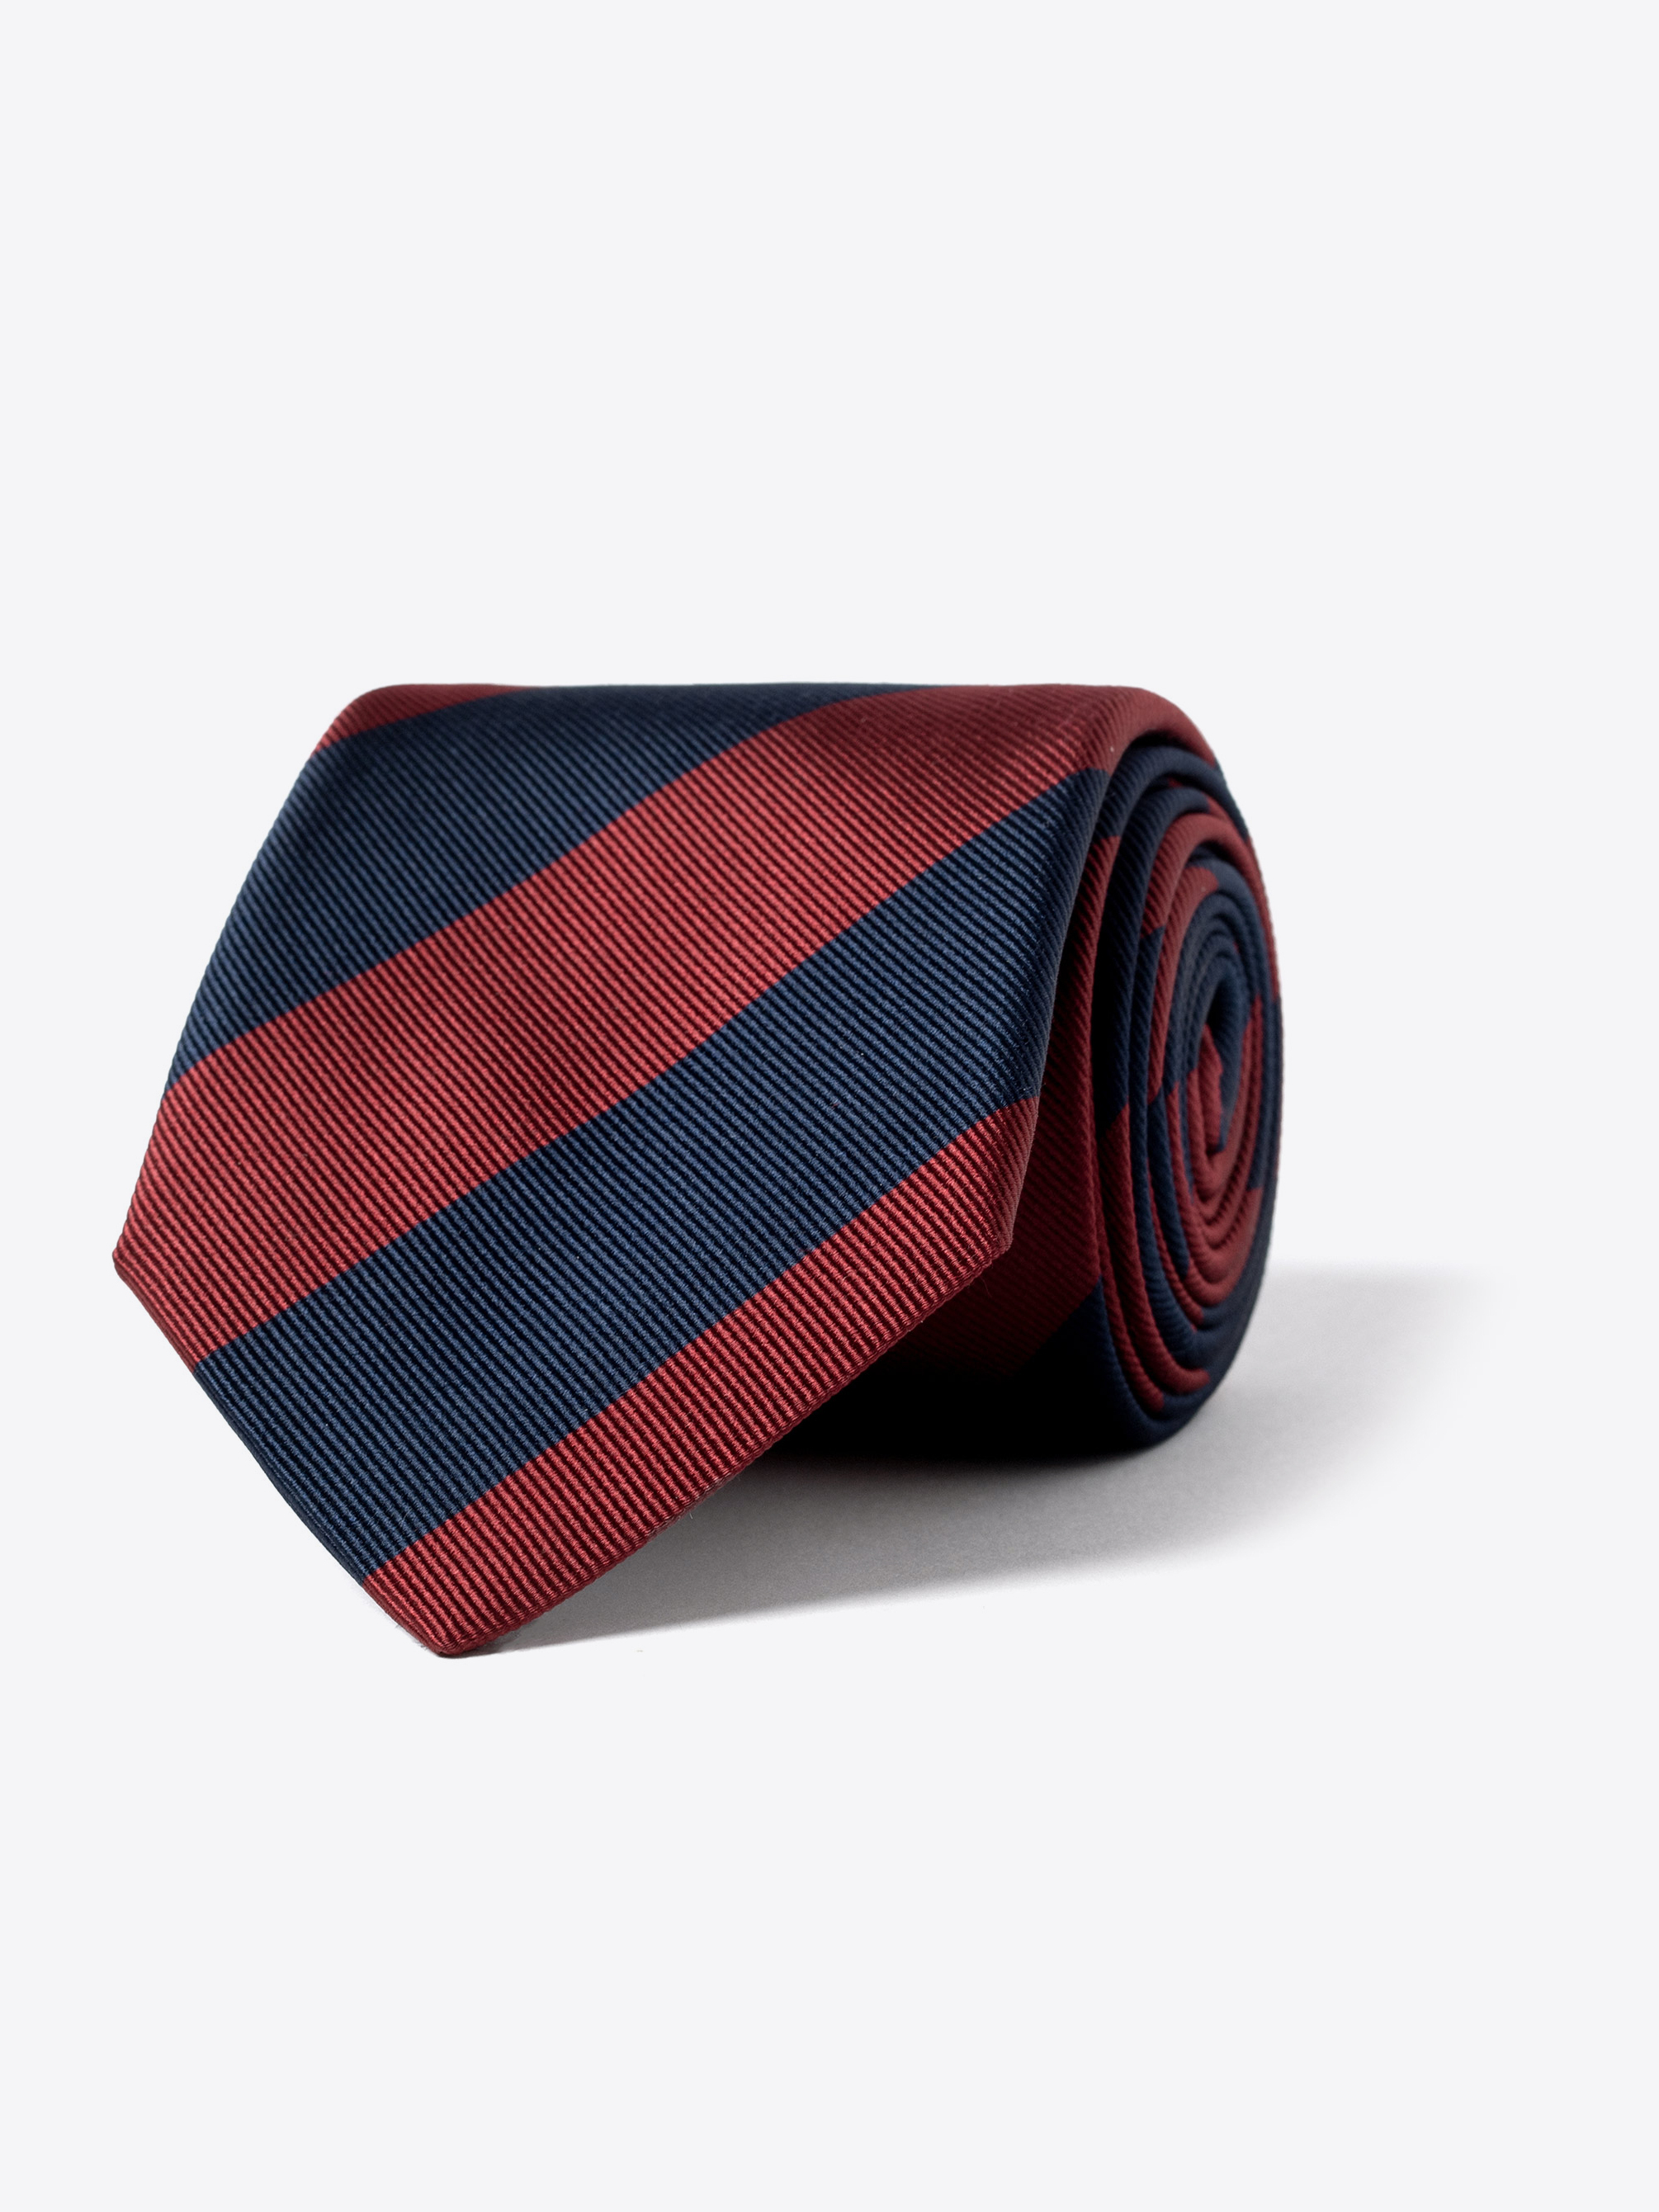 Zoom Image of Red and Navy Stripe Repp Silk Tie